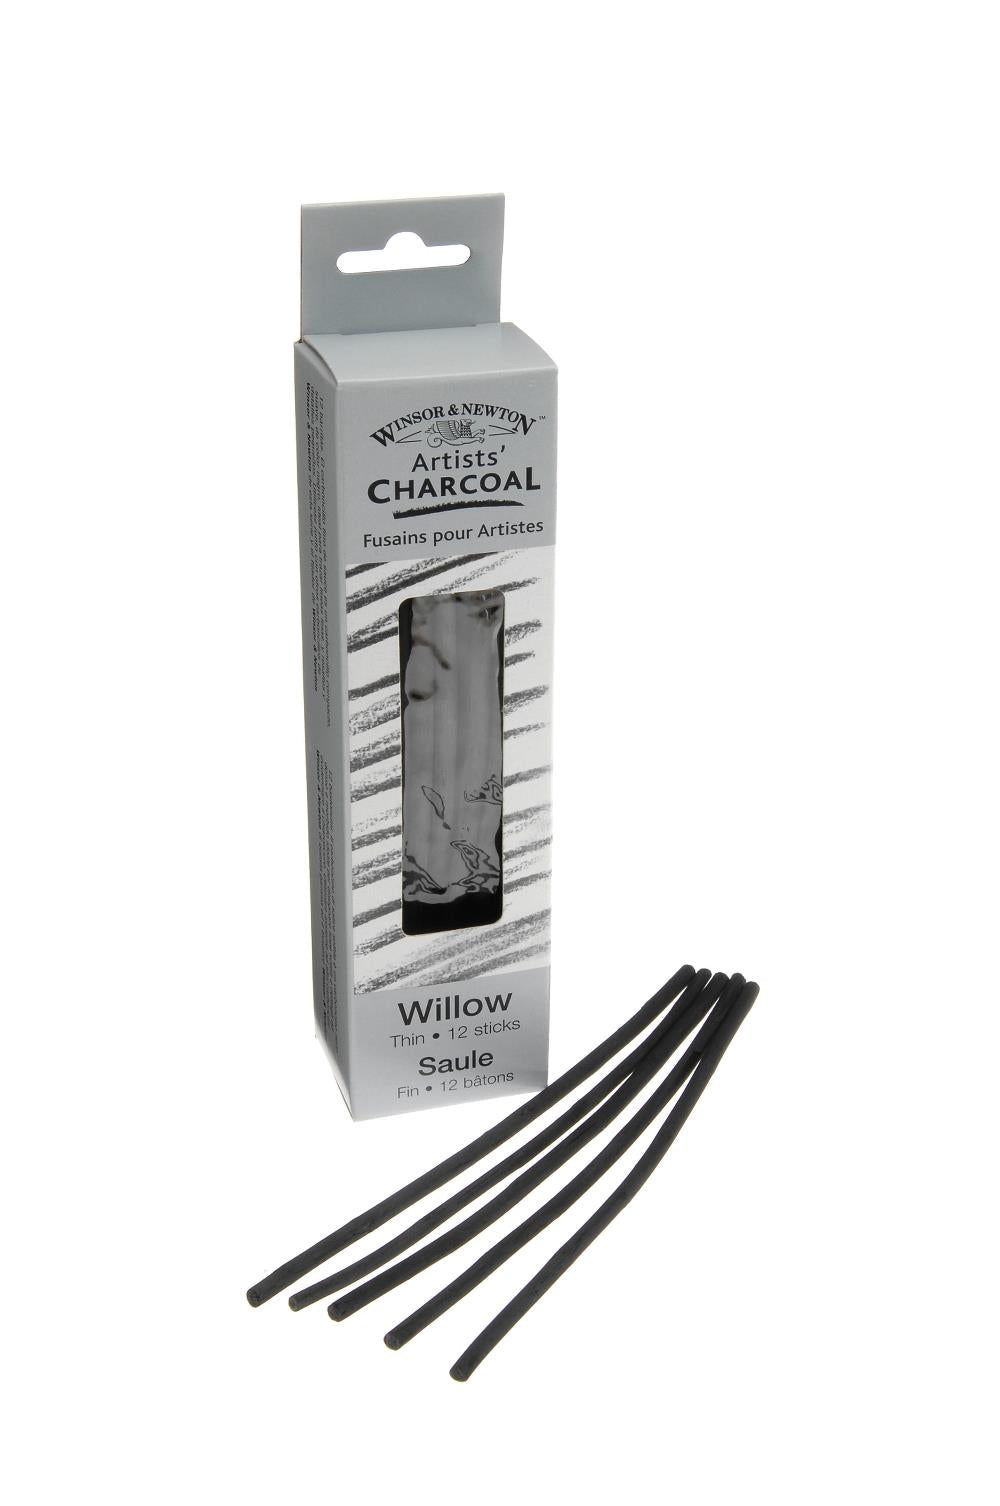 Winsor & Newton Charcoal Willow - 12 Thin charcoal sticks